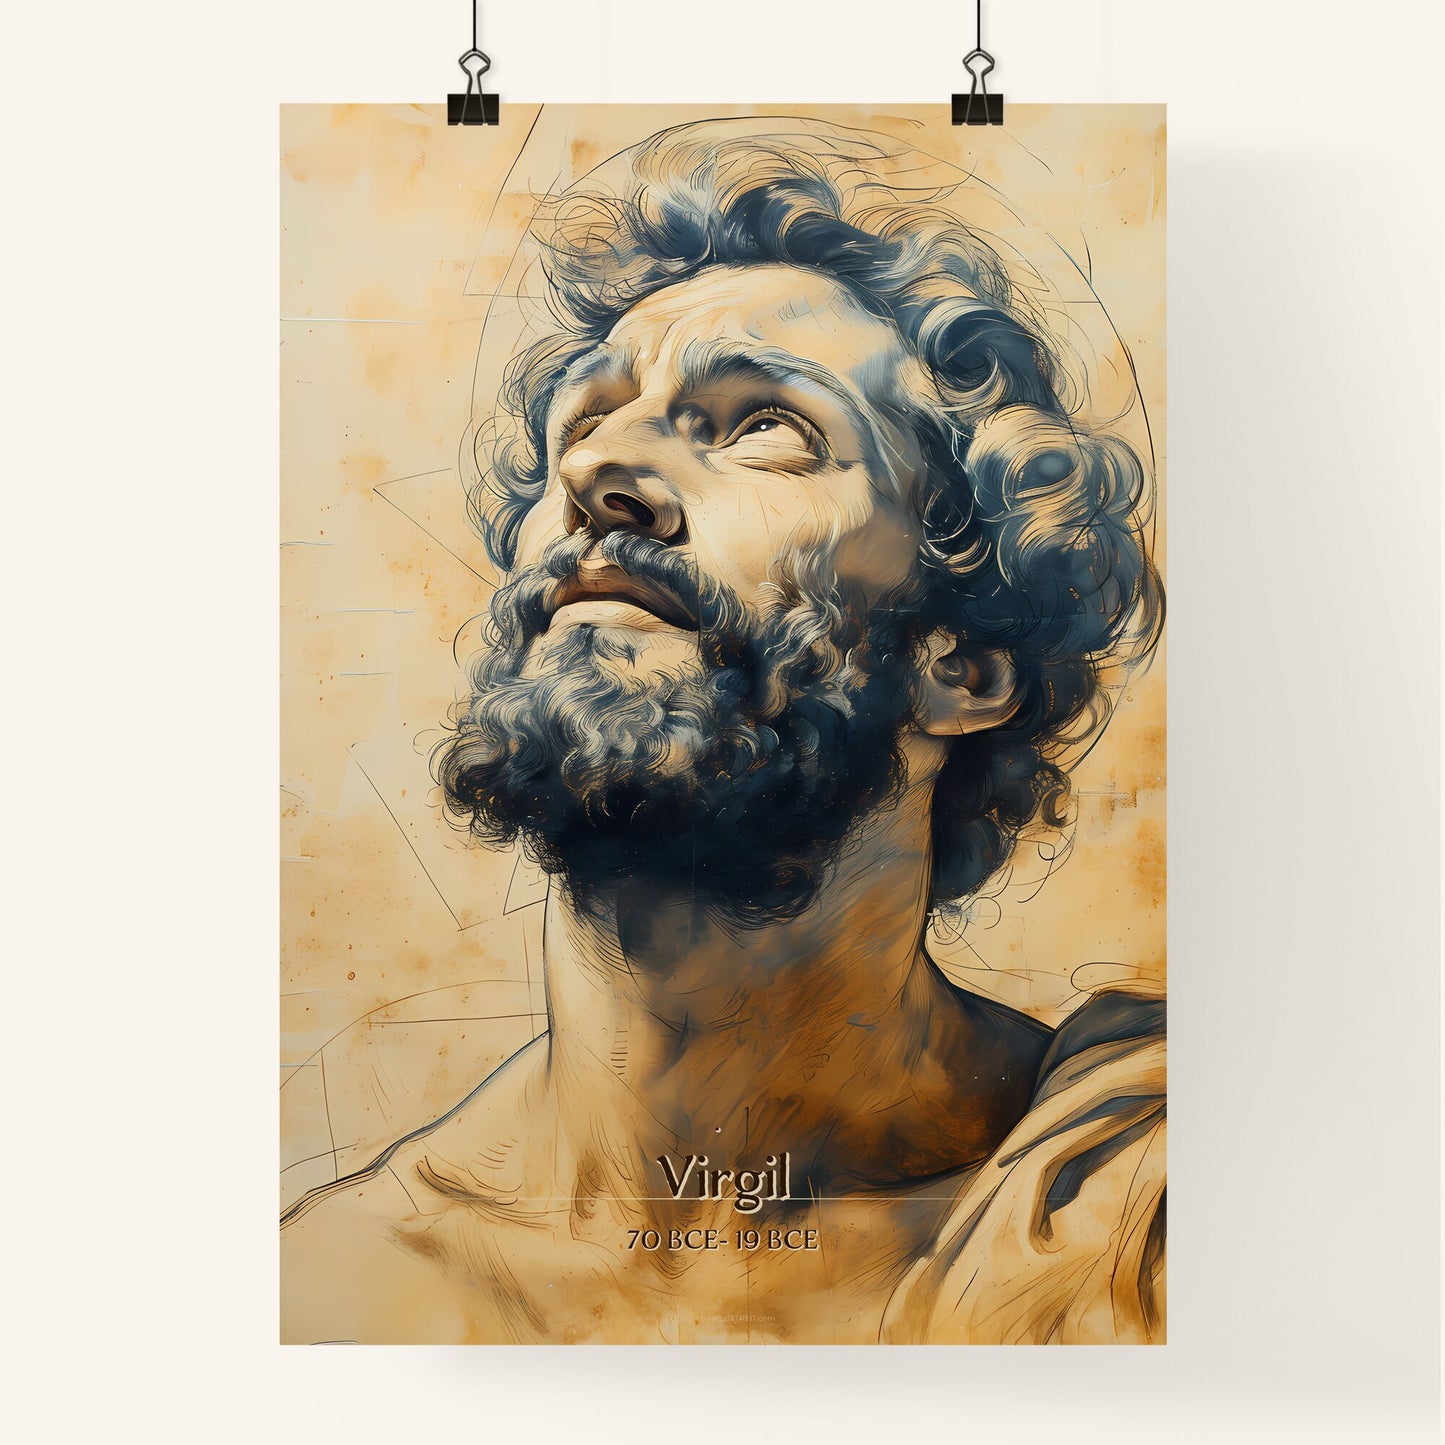 Virgil, 70 BCE- 19 BCE, A Poster of a drawing of a bearded man Default Title